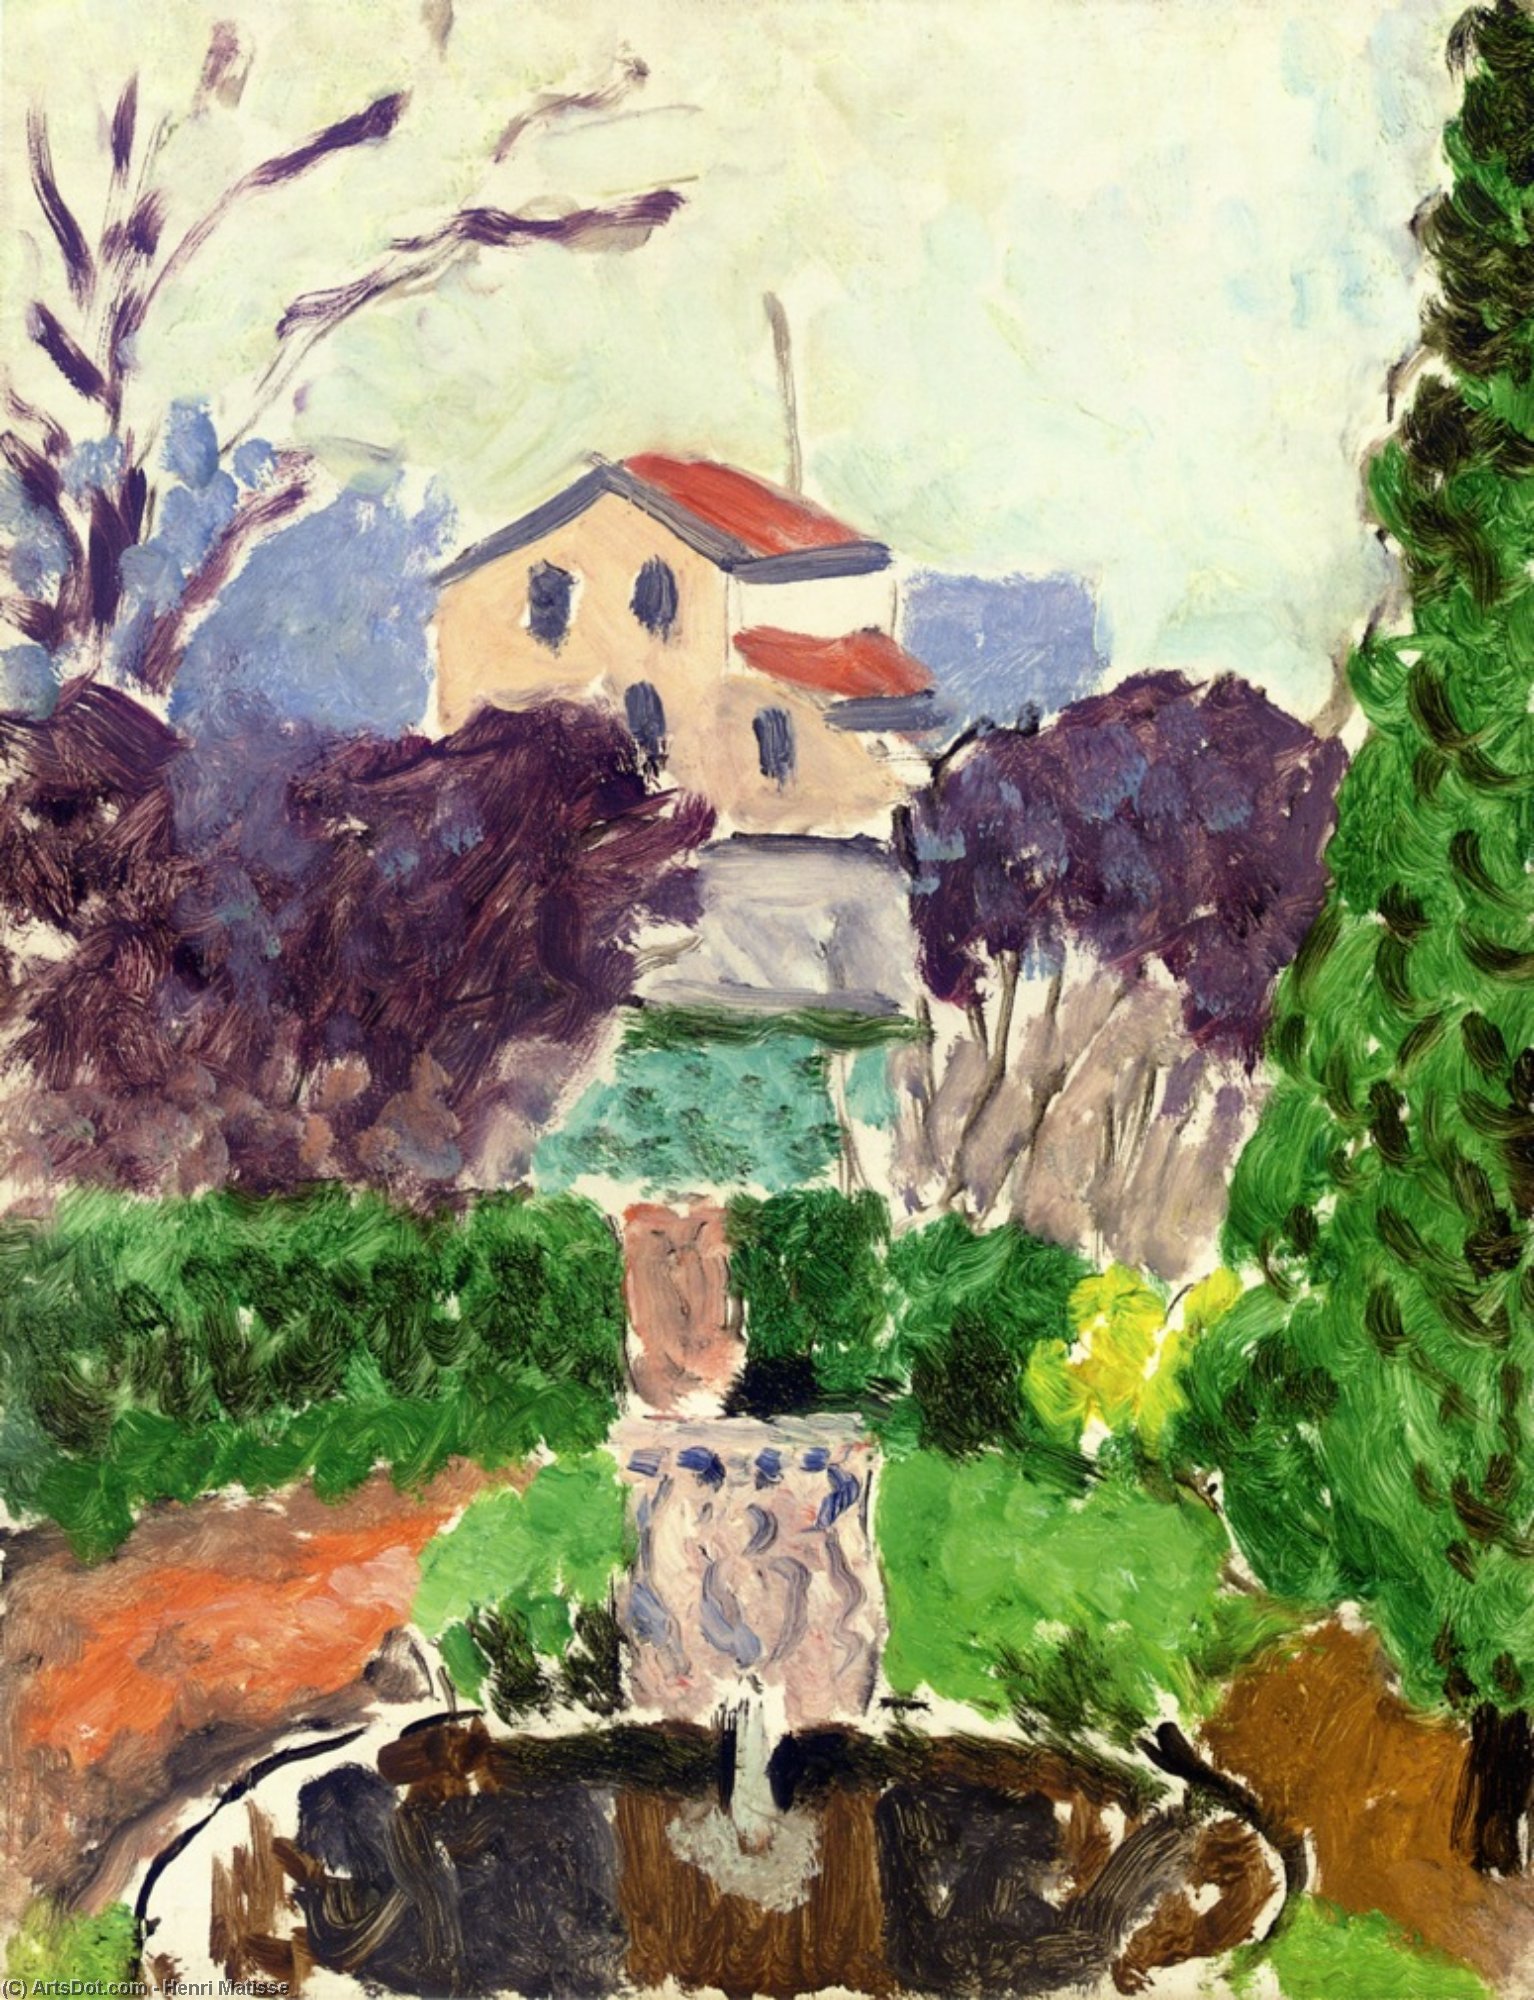 WikiOO.org - 백과 사전 - 회화, 삽화 Henri Matisse - The Artist's Garden at Issy les Moulineaux